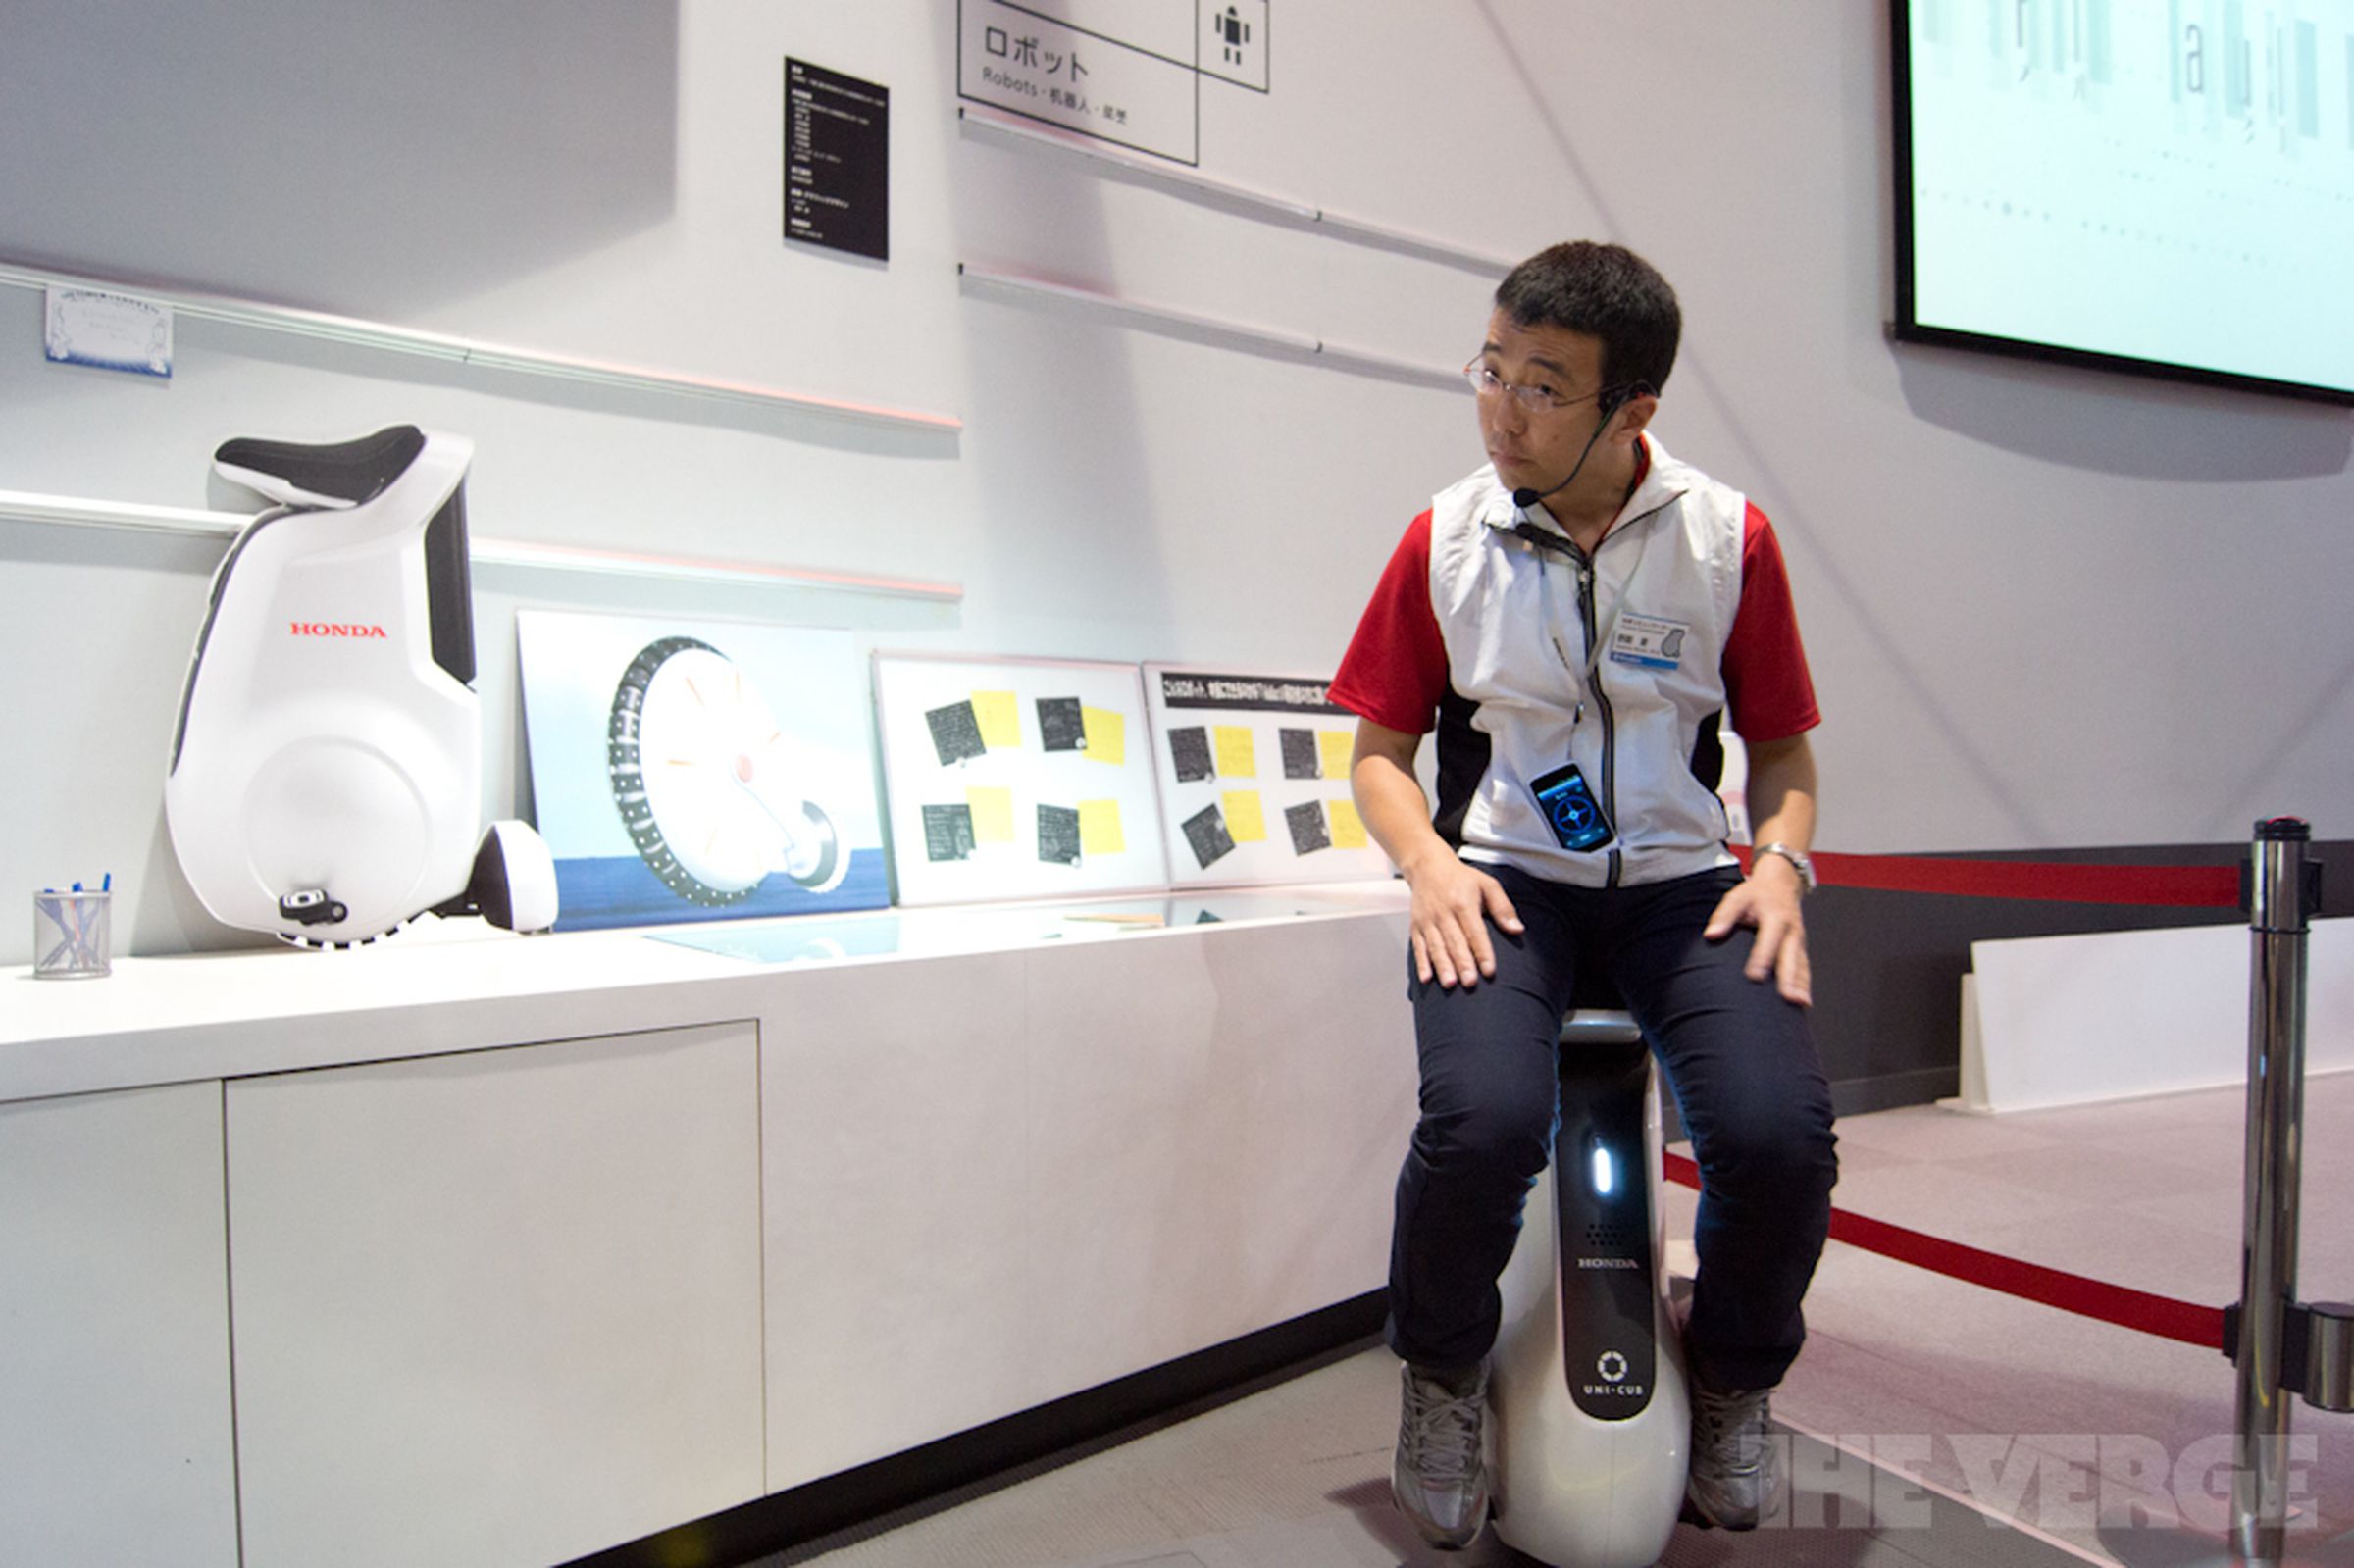 A first look at Honda's Uni-Cub personal mobility device